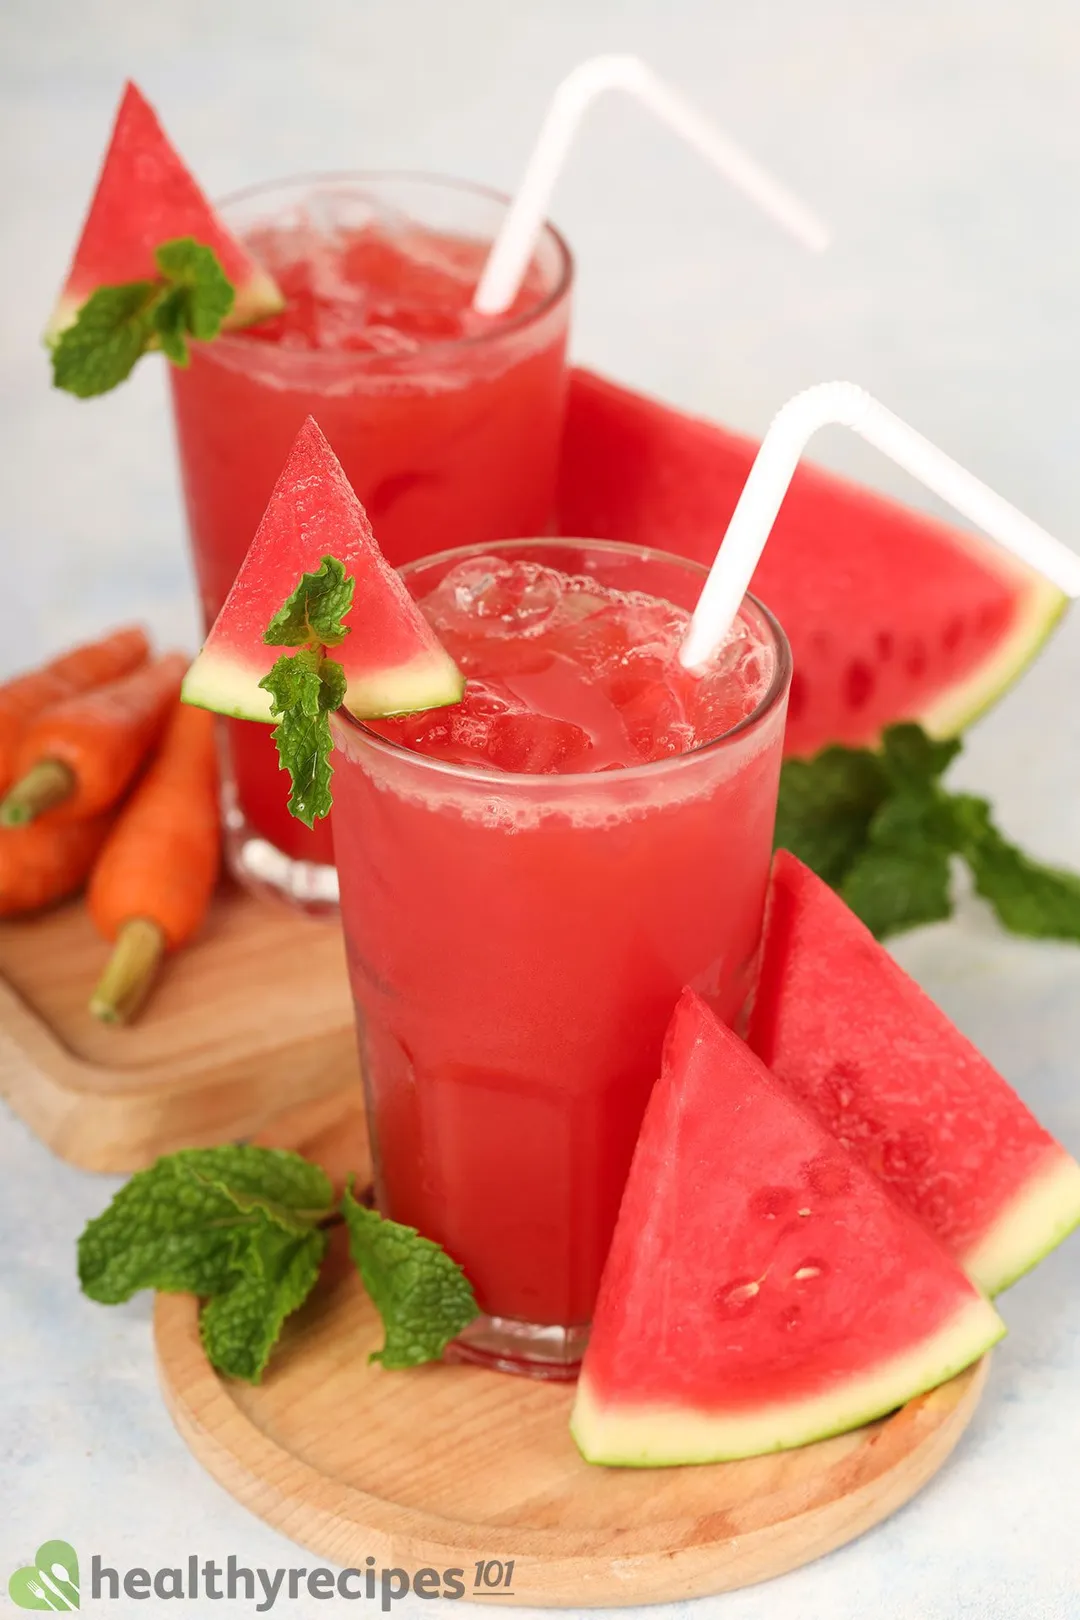 Two glasses of watermelon carrot juice placed on wooden boards near mint leaves, watermelon slices, and carrots.